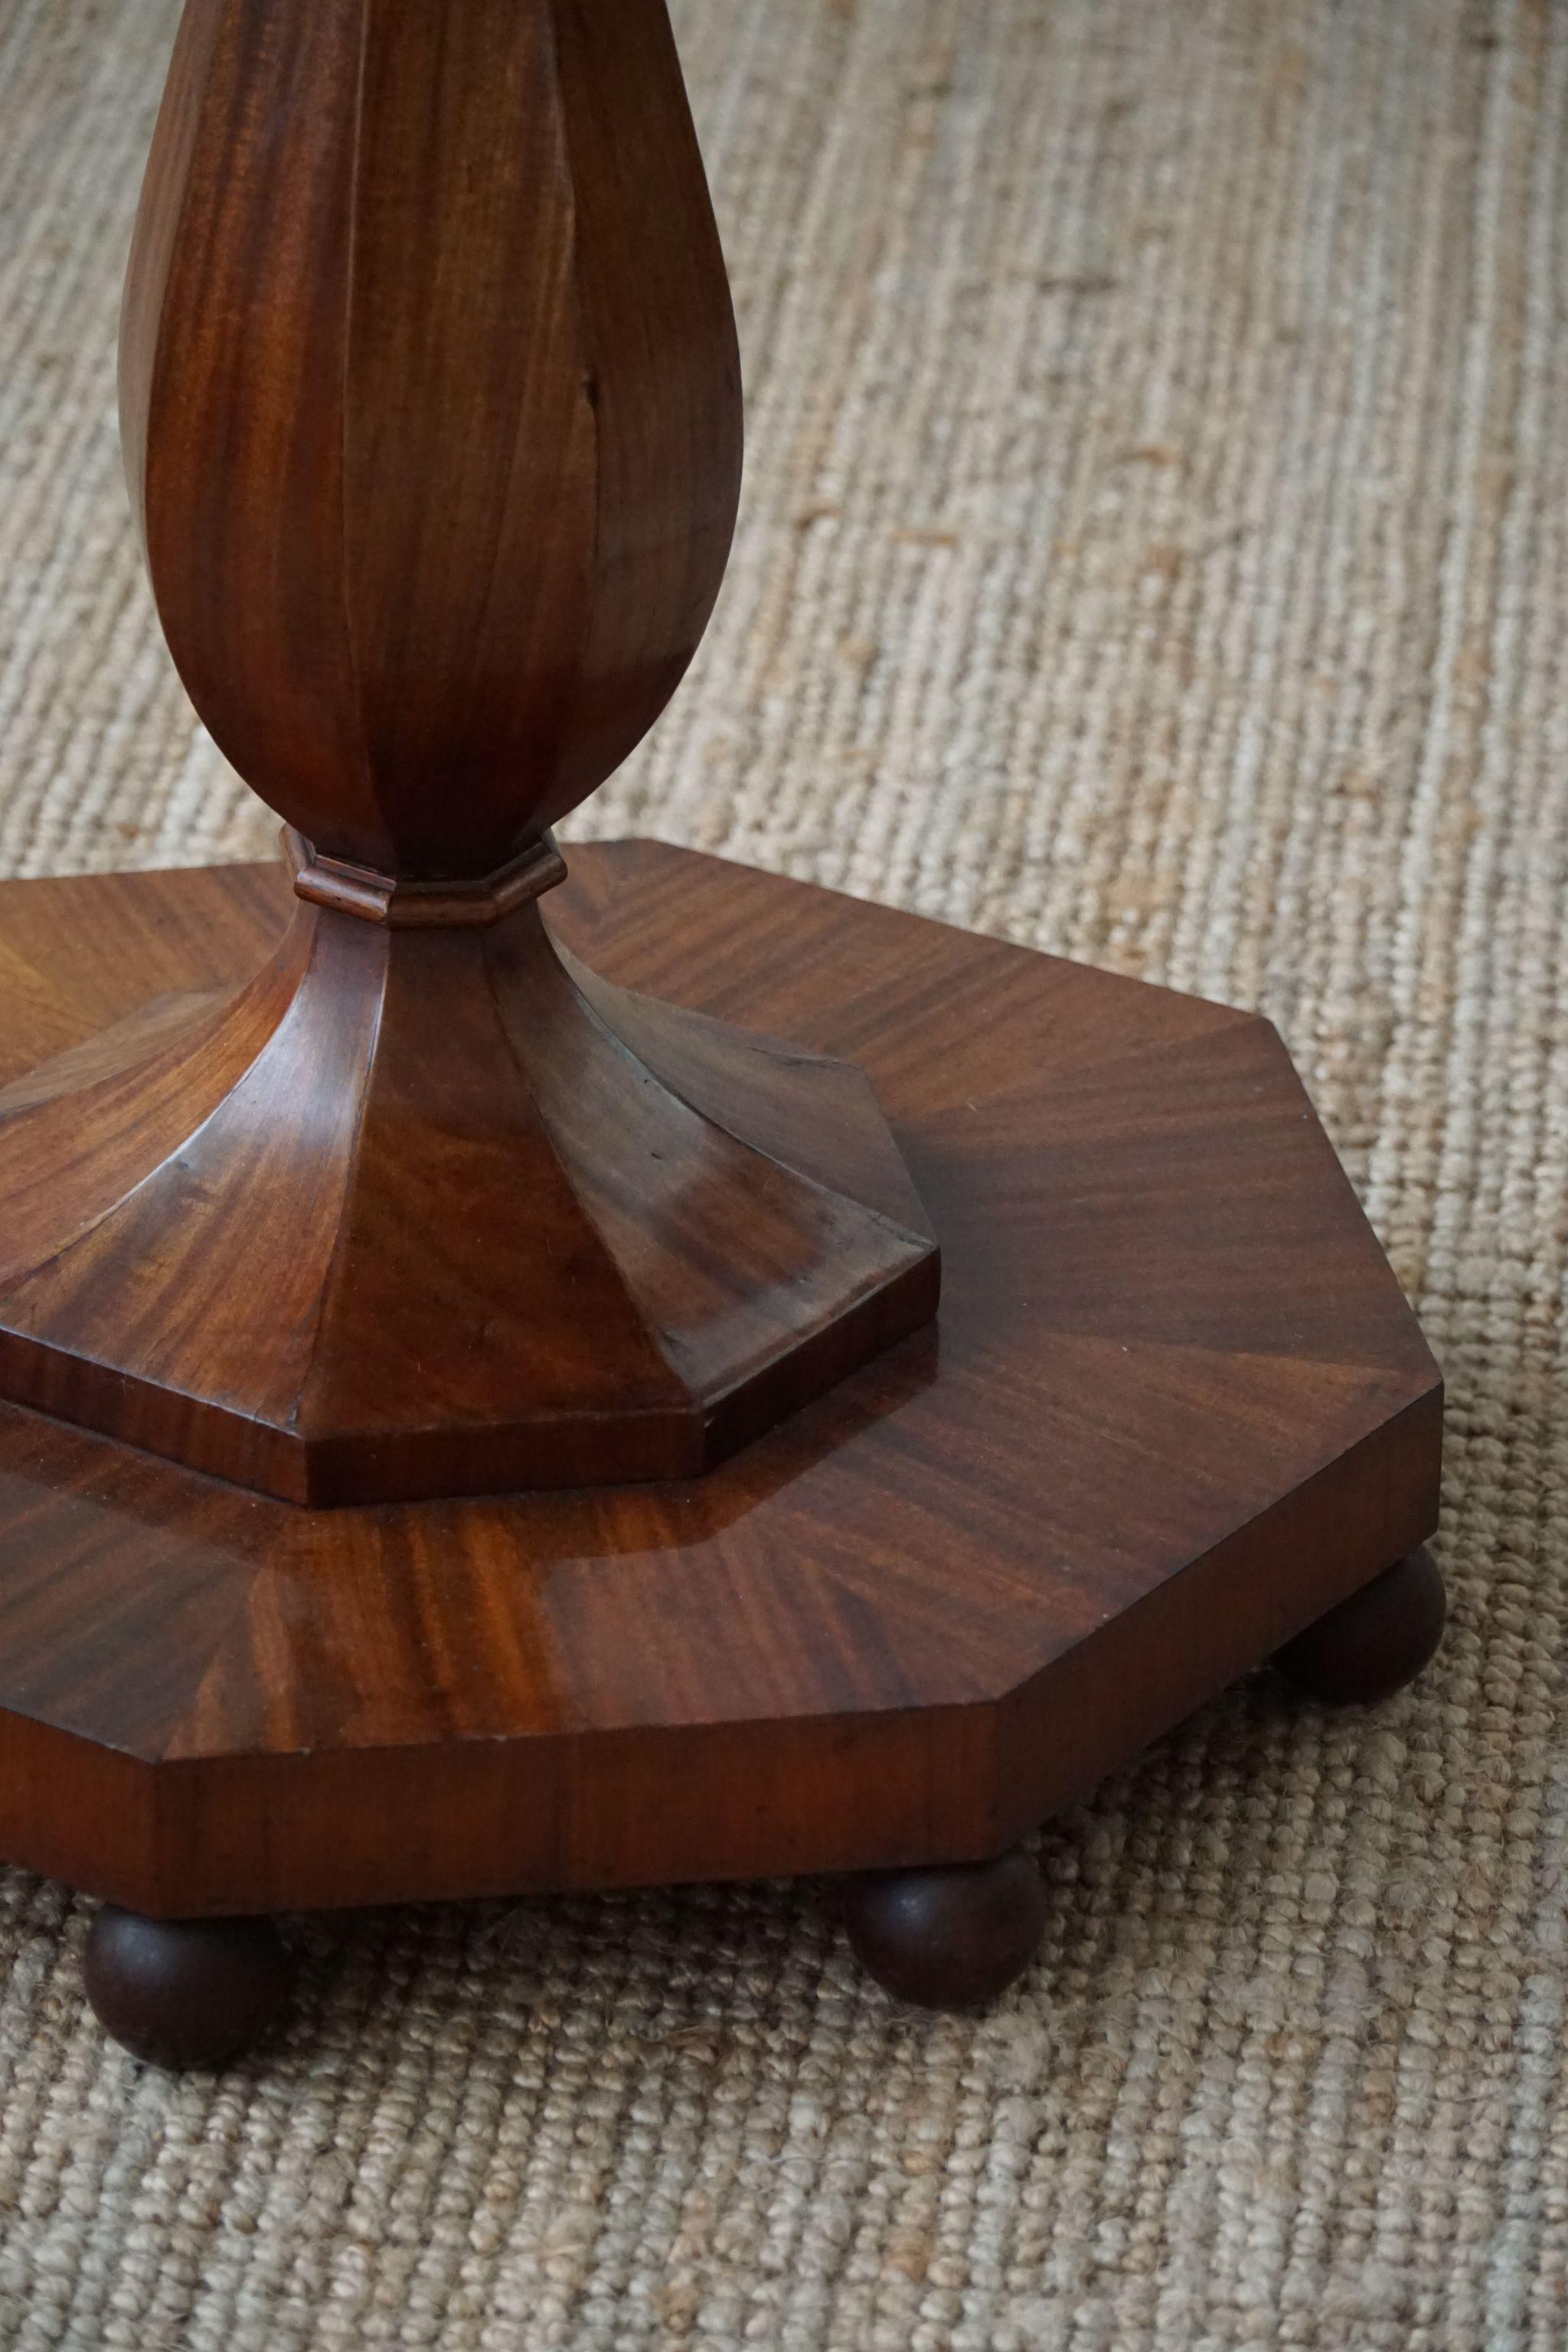 Art Deco, Round Pedestal / Side Table in Walnut, By a Danish Cabinetmaker, 1940s For Sale 4